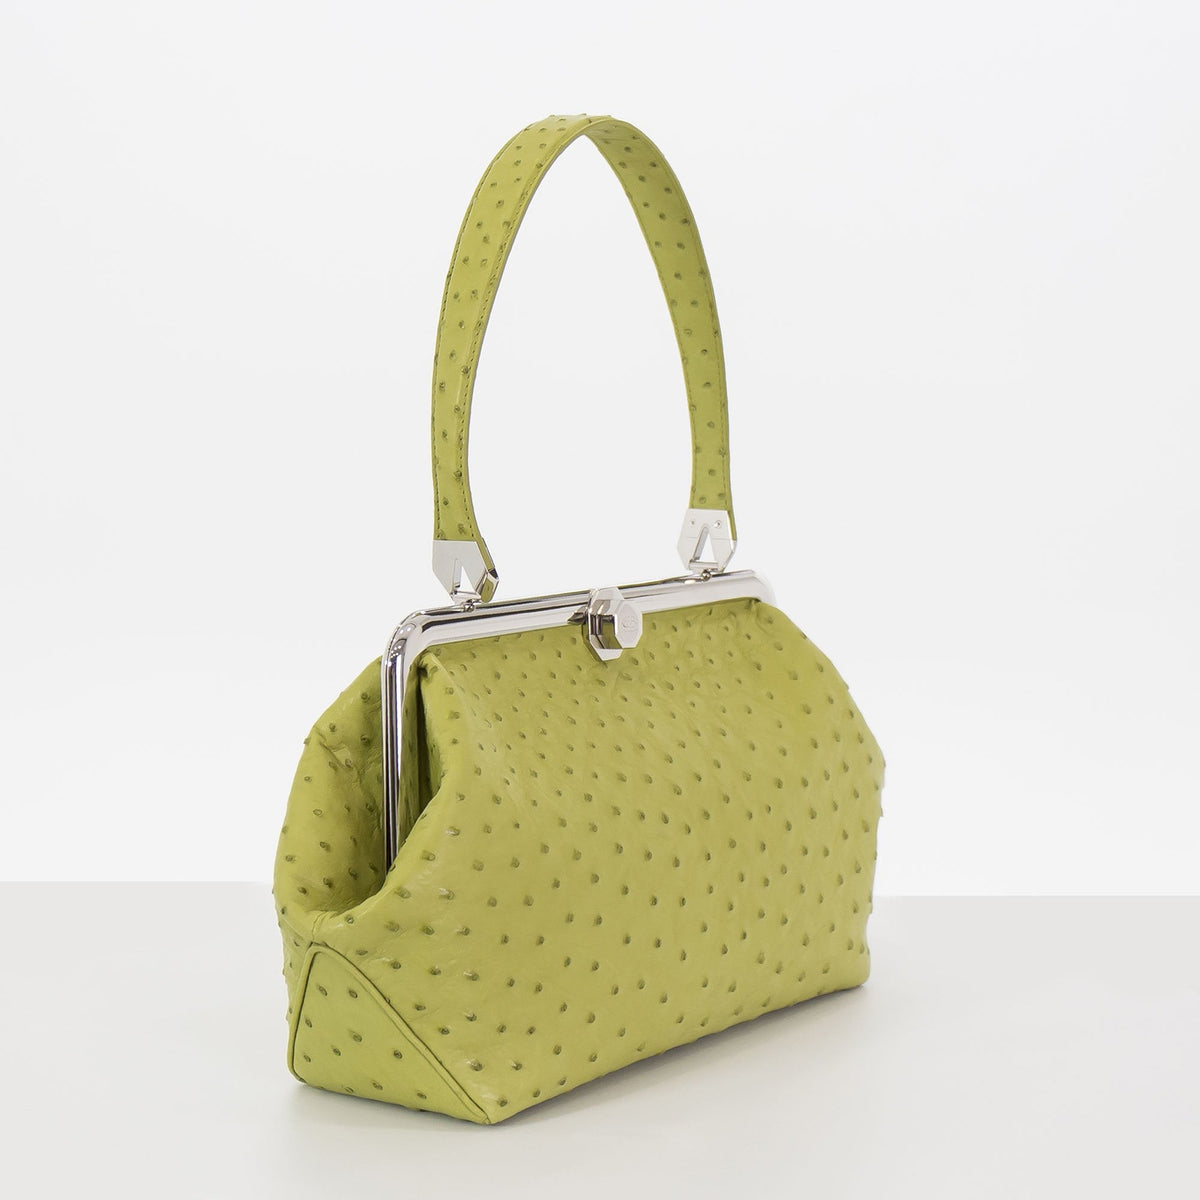 LUNA in Chartreuse Ostrich-DOTTI Luxury Handbag, Made in Italy